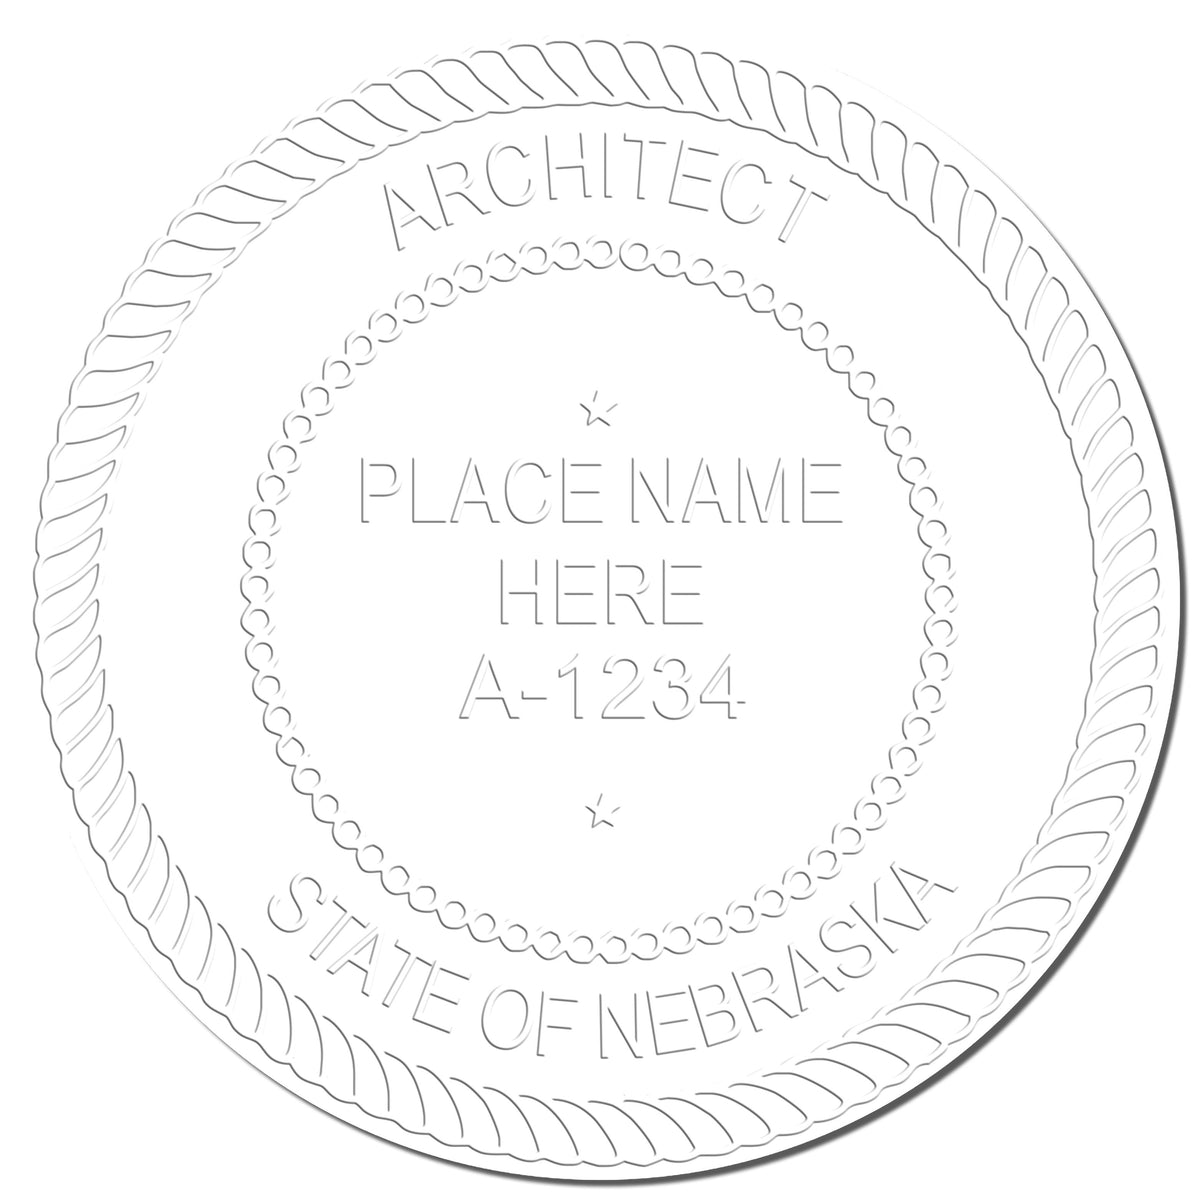 This paper is stamped with a sample imprint of the State of Nebraska Architectural Seal Embosser, signifying its quality and reliability.